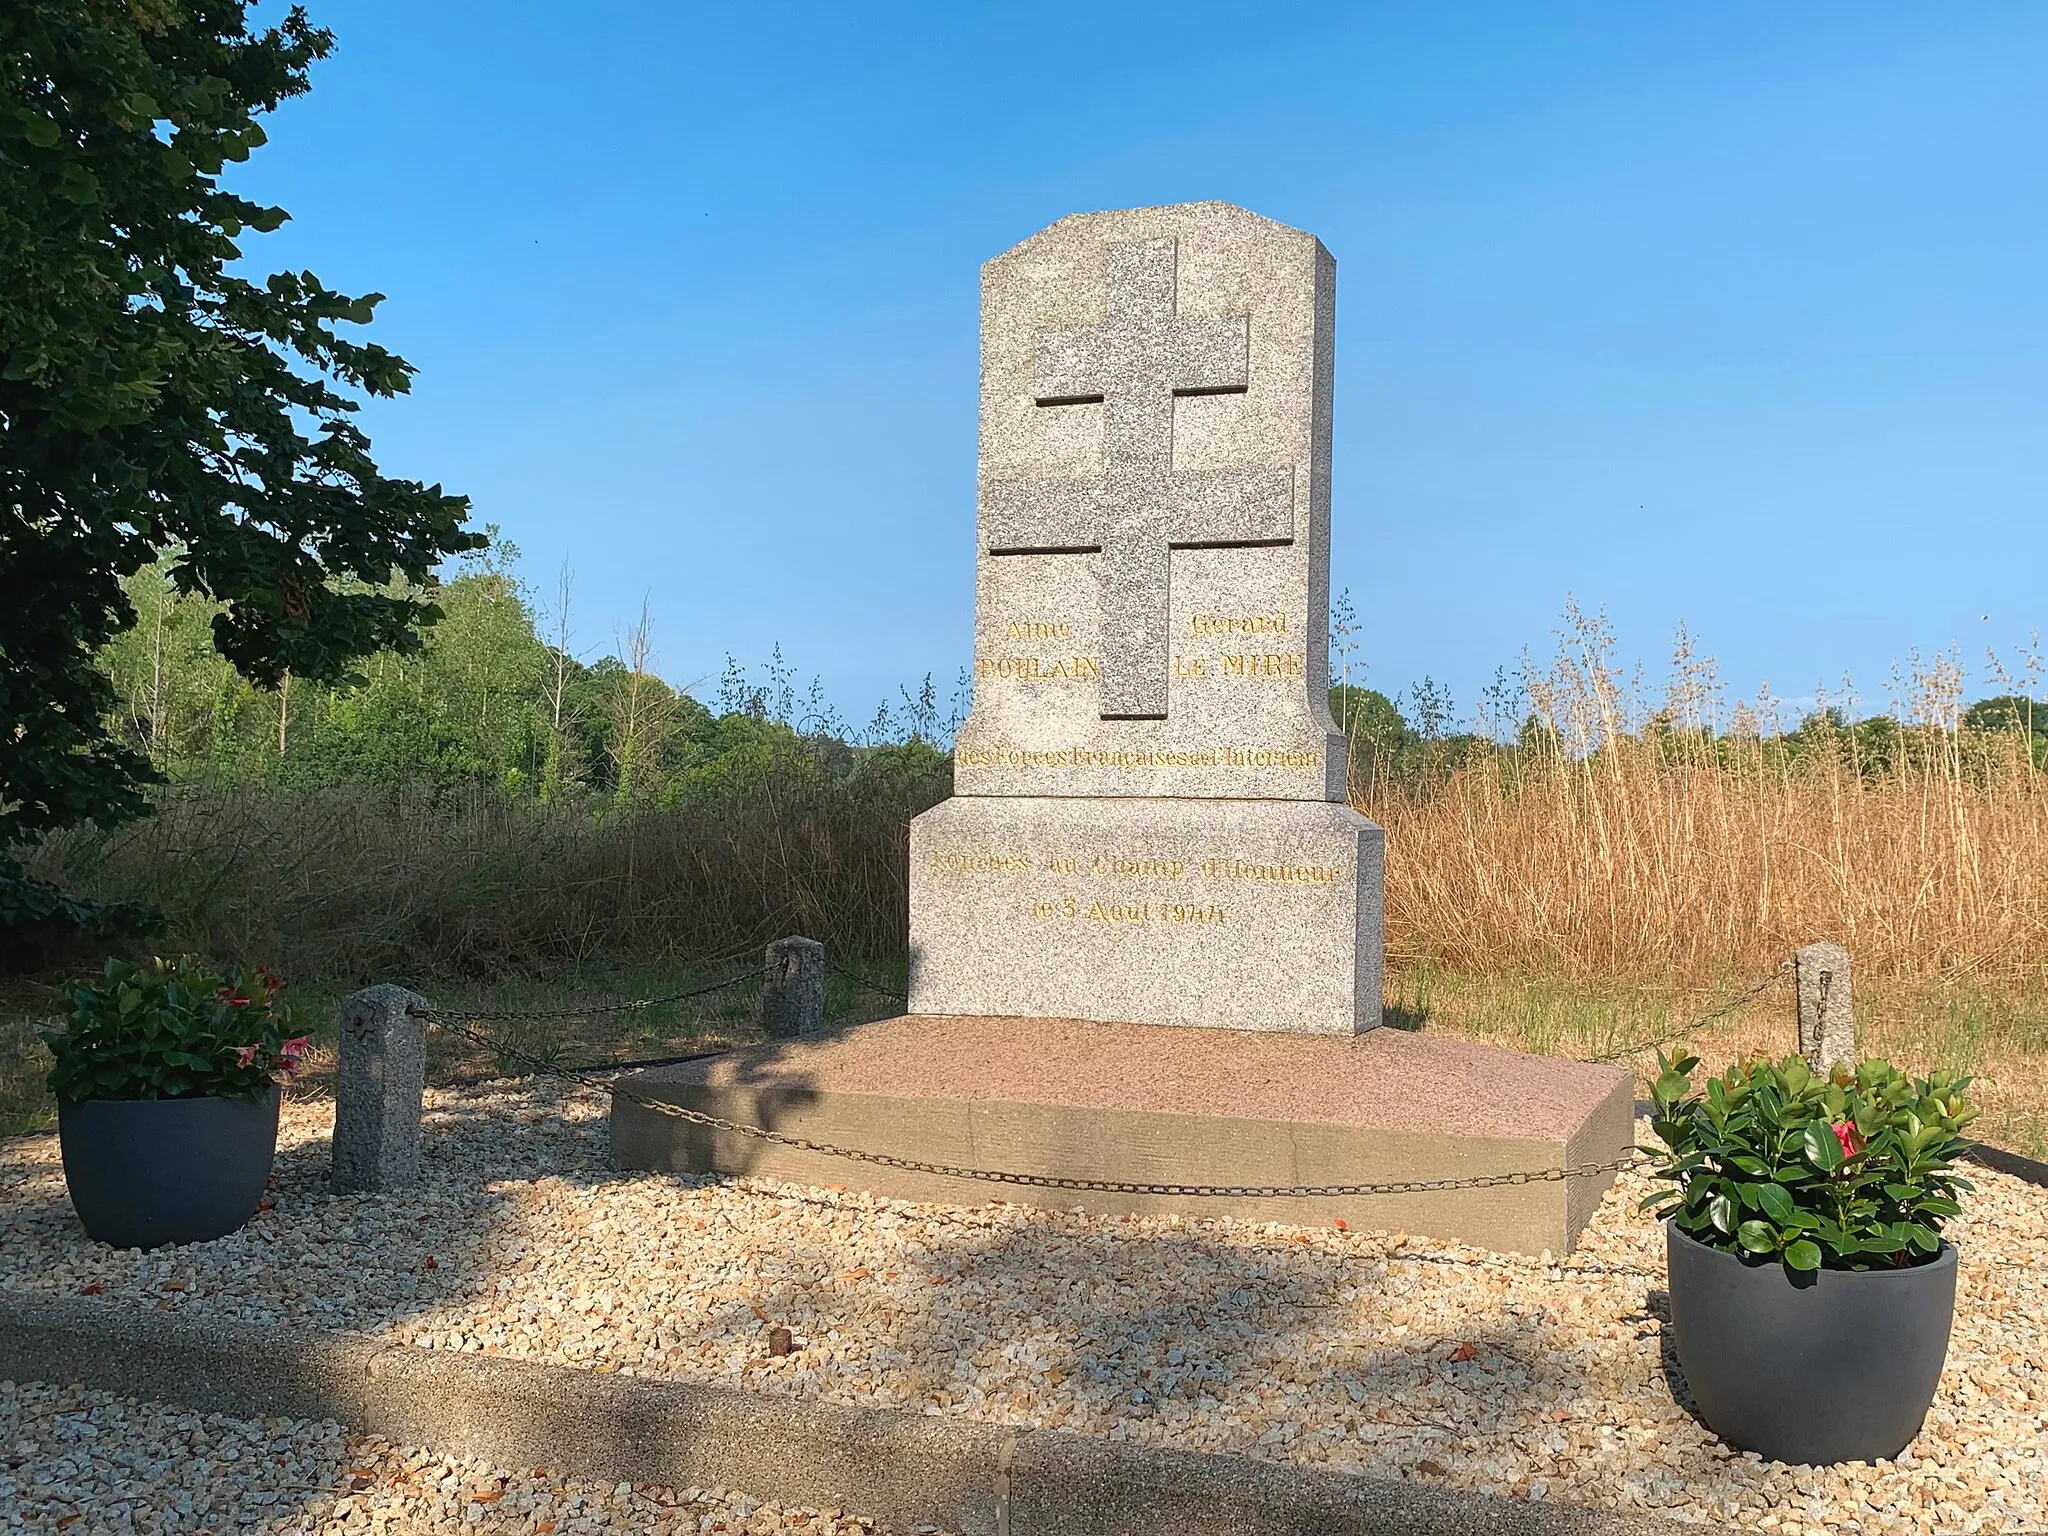 Photo showing: The stele of Vieux-Bourg in Saint-Lormel in Côtes d'Armor, France, erected in memory of Aimé Poulain and Gérard Lemire, two local children engaged in the resistance, shot by the Germans in these places, on August 4, 1944.